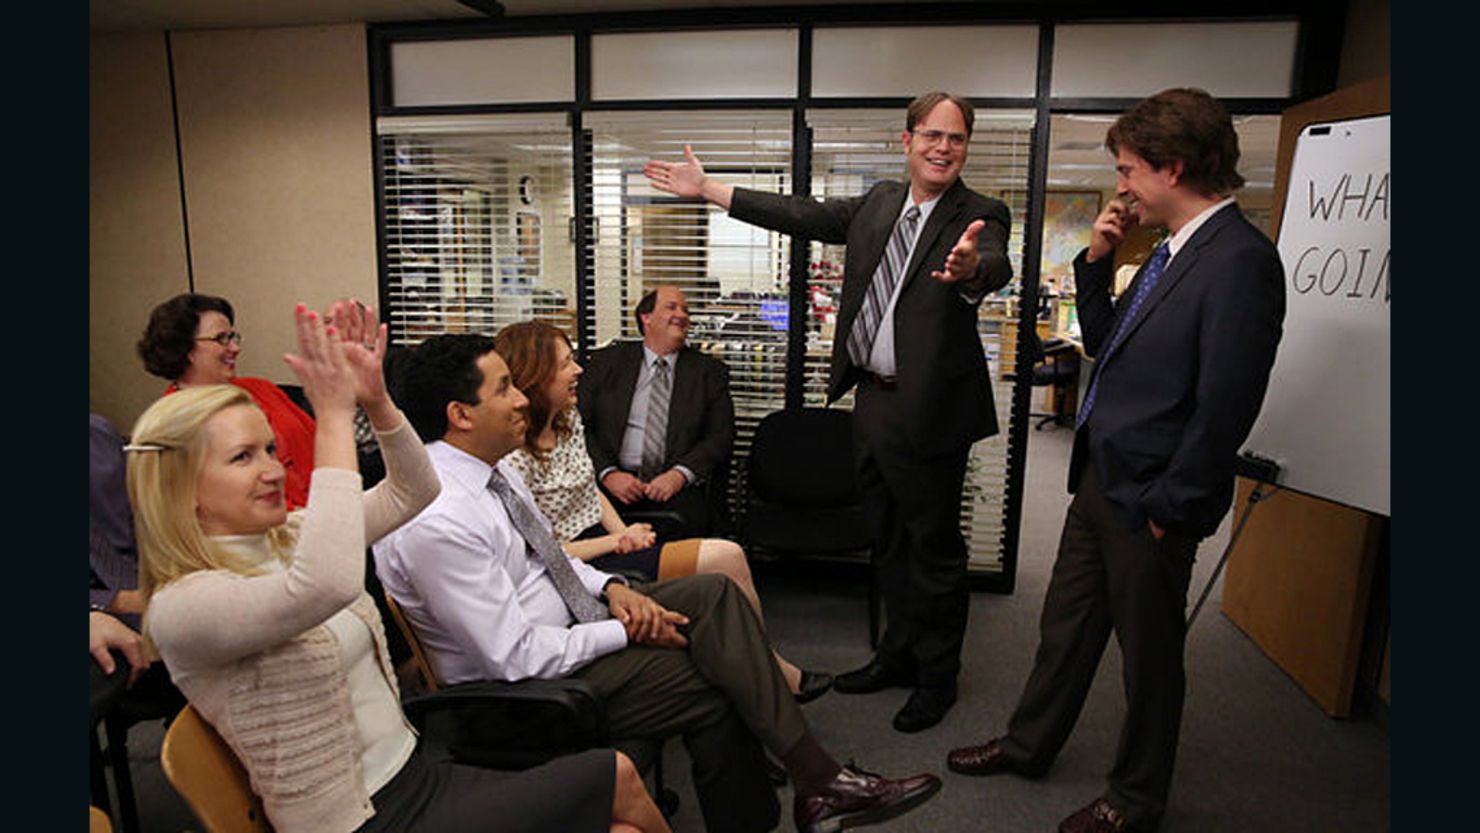 The series finale of "The Office" will air on May 16.